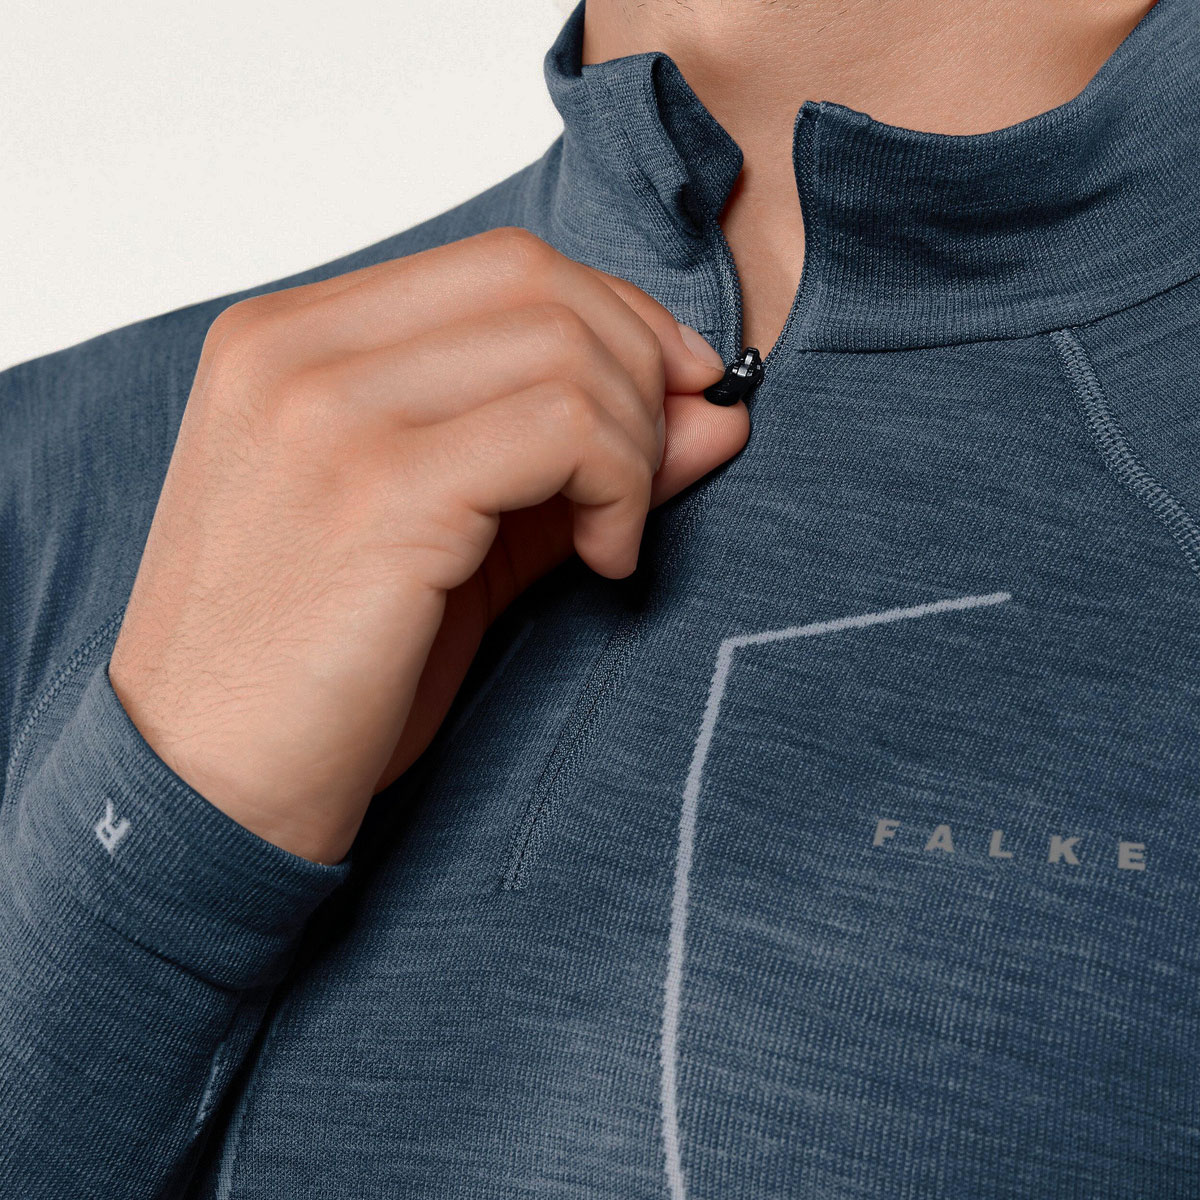 FALKE WOOL-TECH FUNCTIONAL UNDERWEAR FOR COLD TO VERY COLD